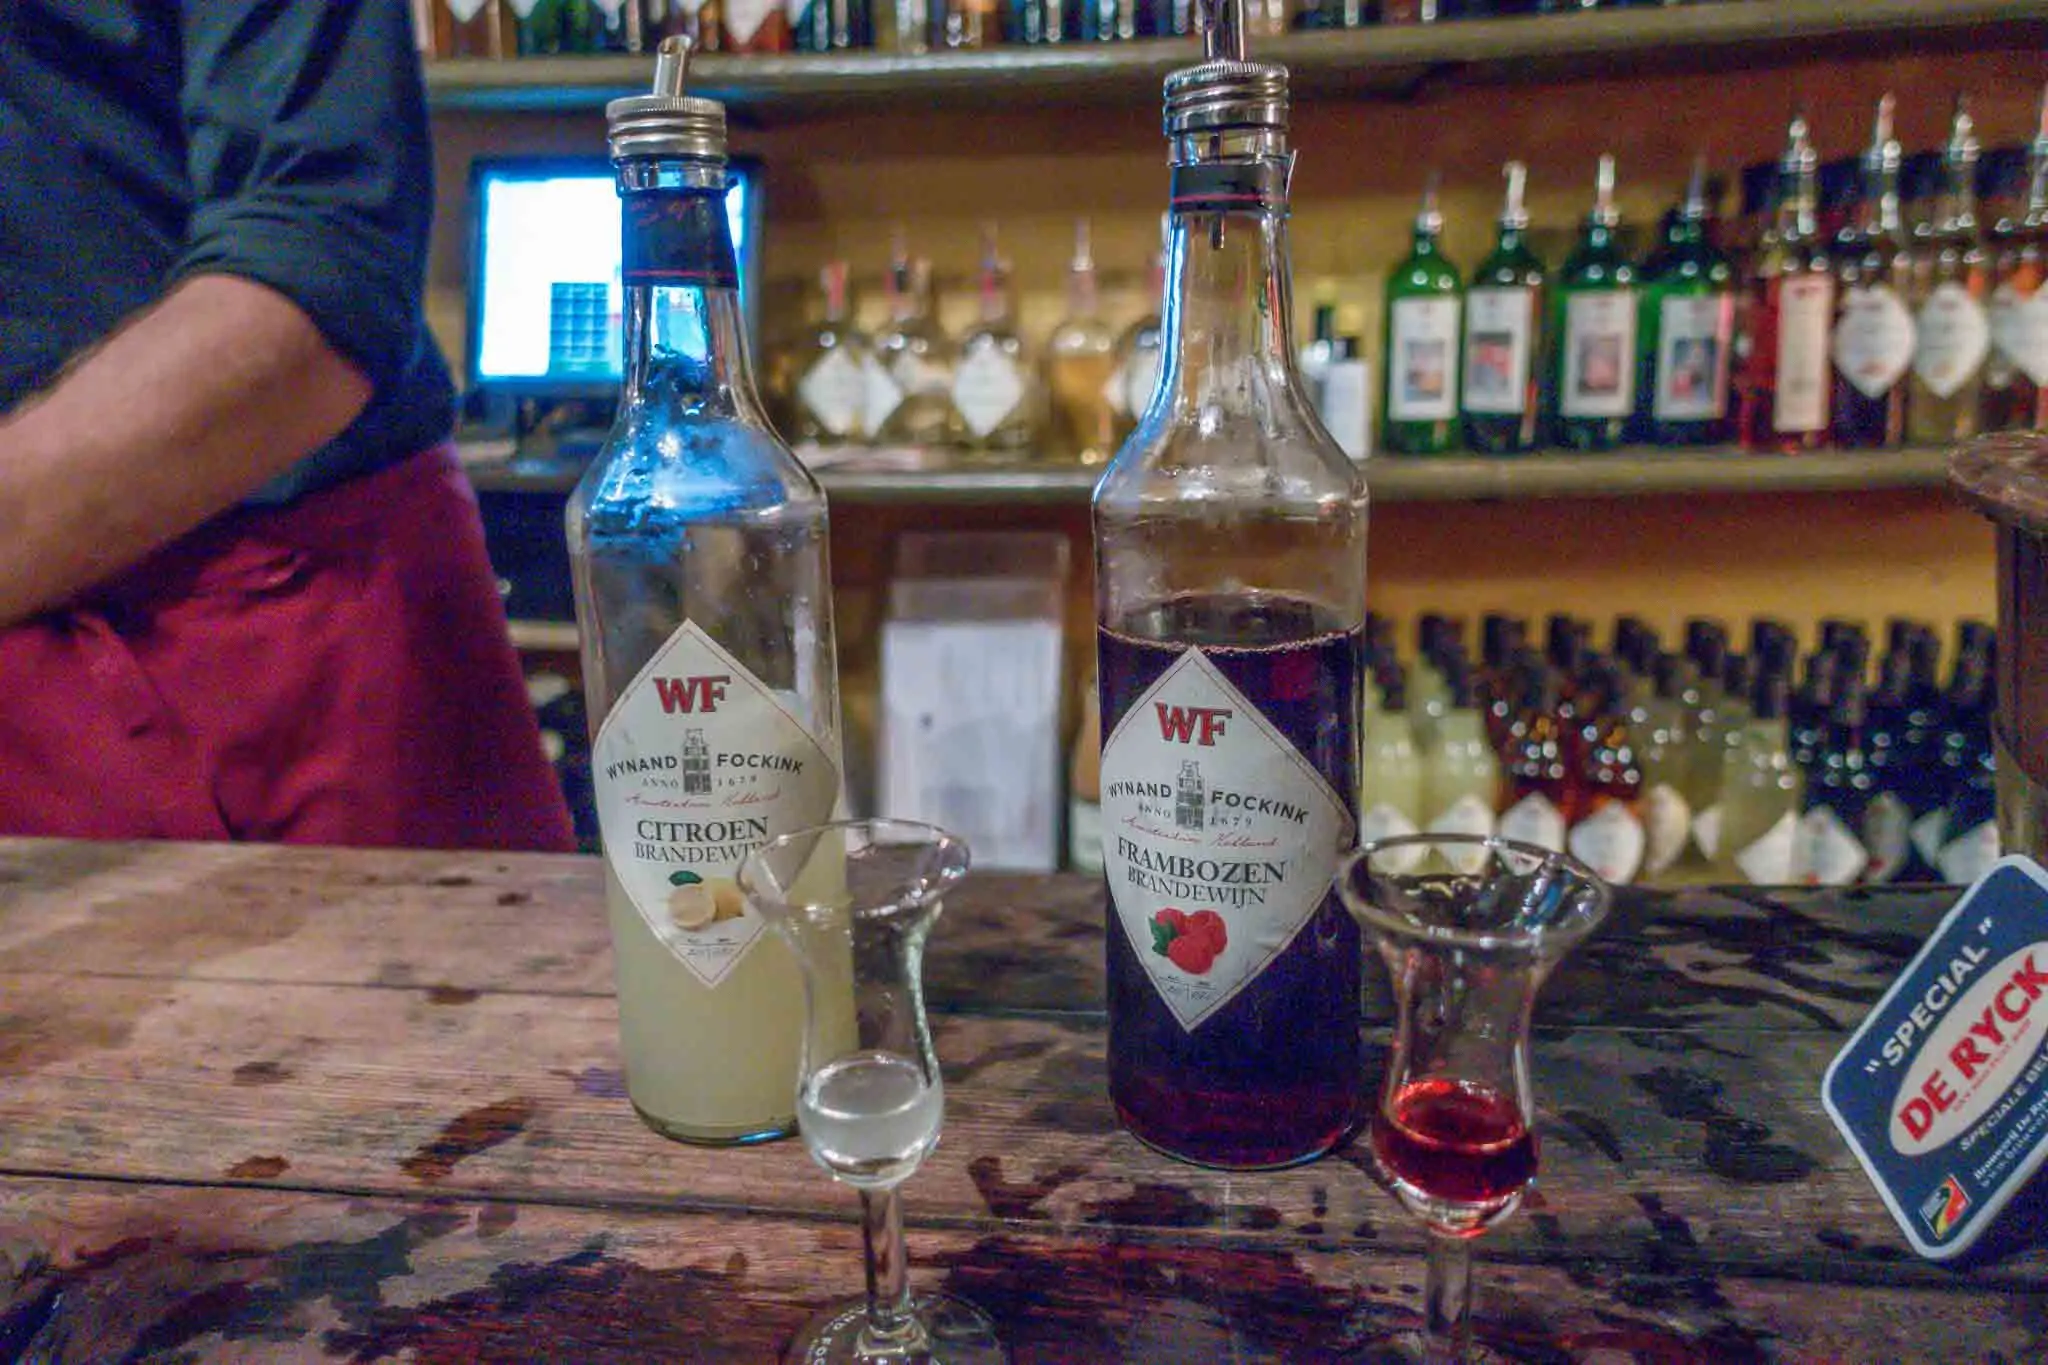 Bottles and glasses of fruit brandy on a bar